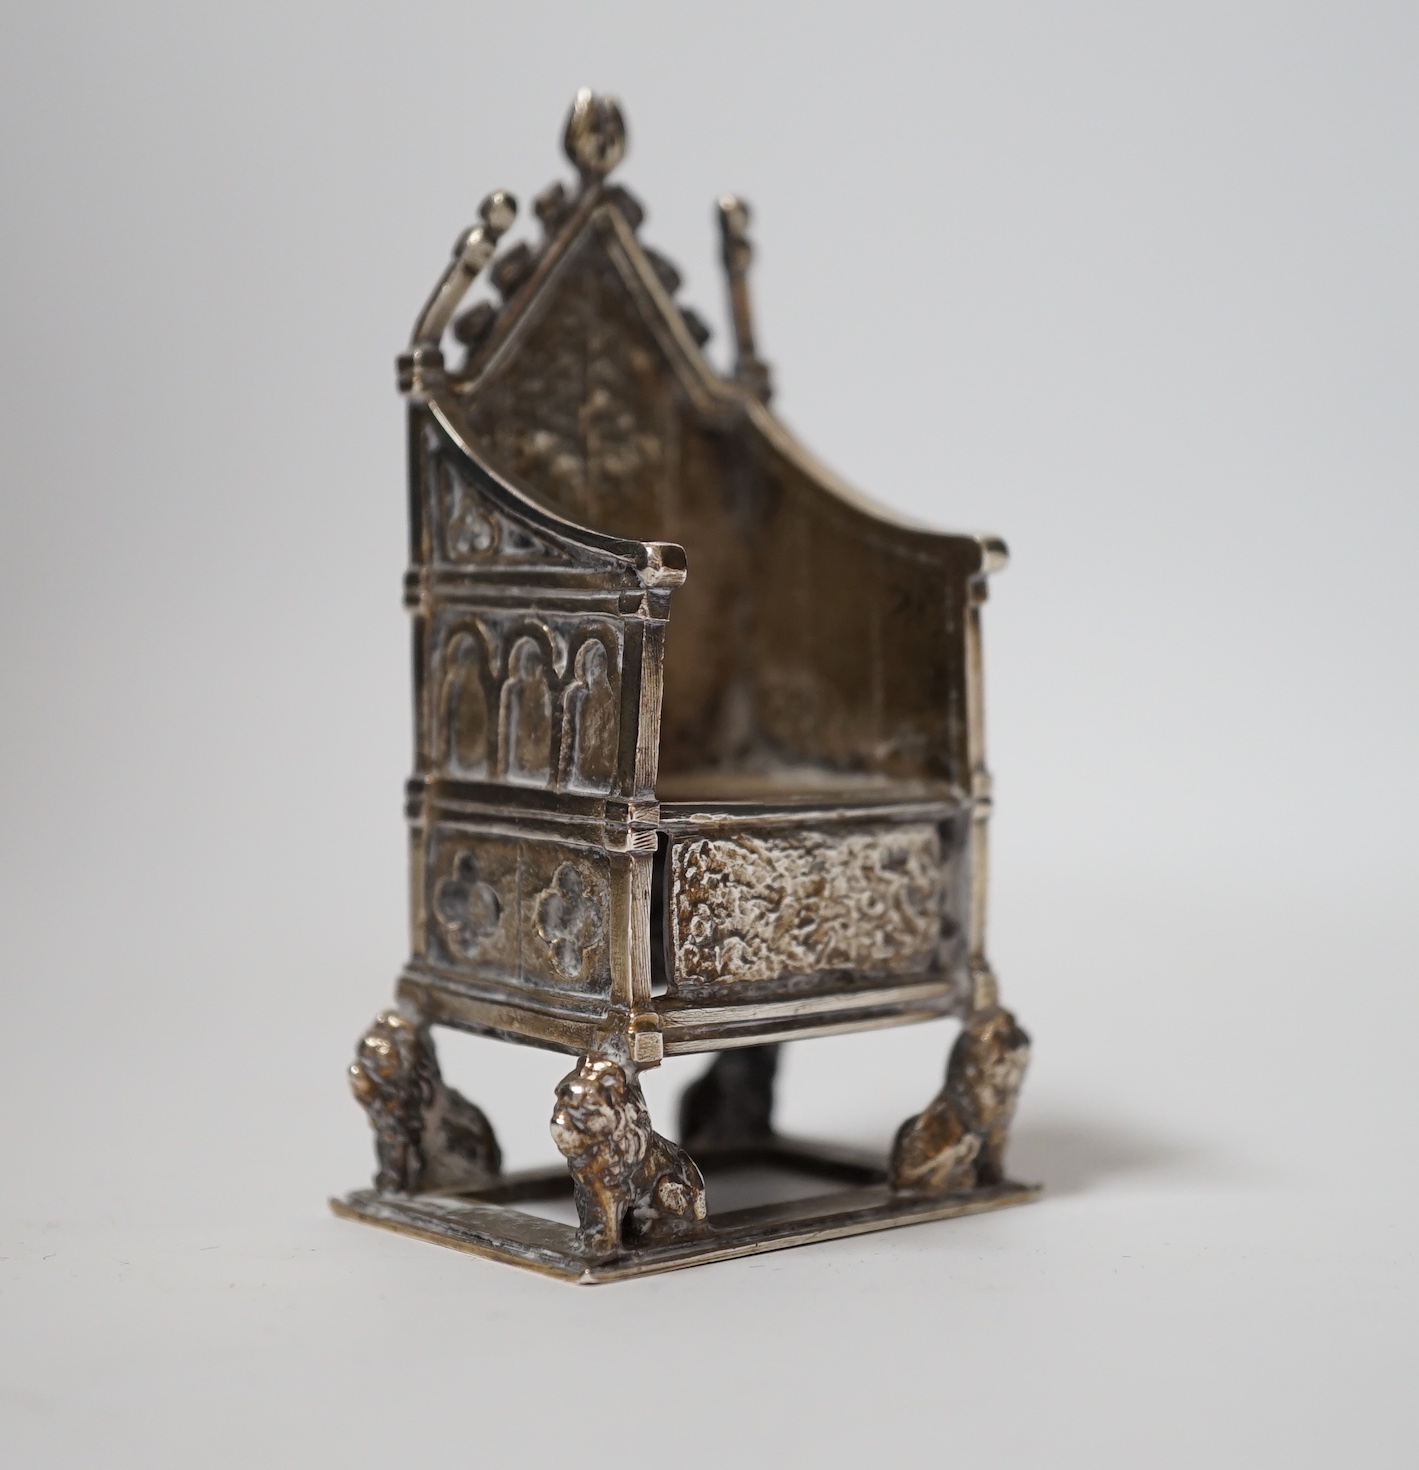 A George V silver miniature model of a throne, by Saunders, Shepherd & Co Ltd, London, 1936, 85mm, 92 grams.